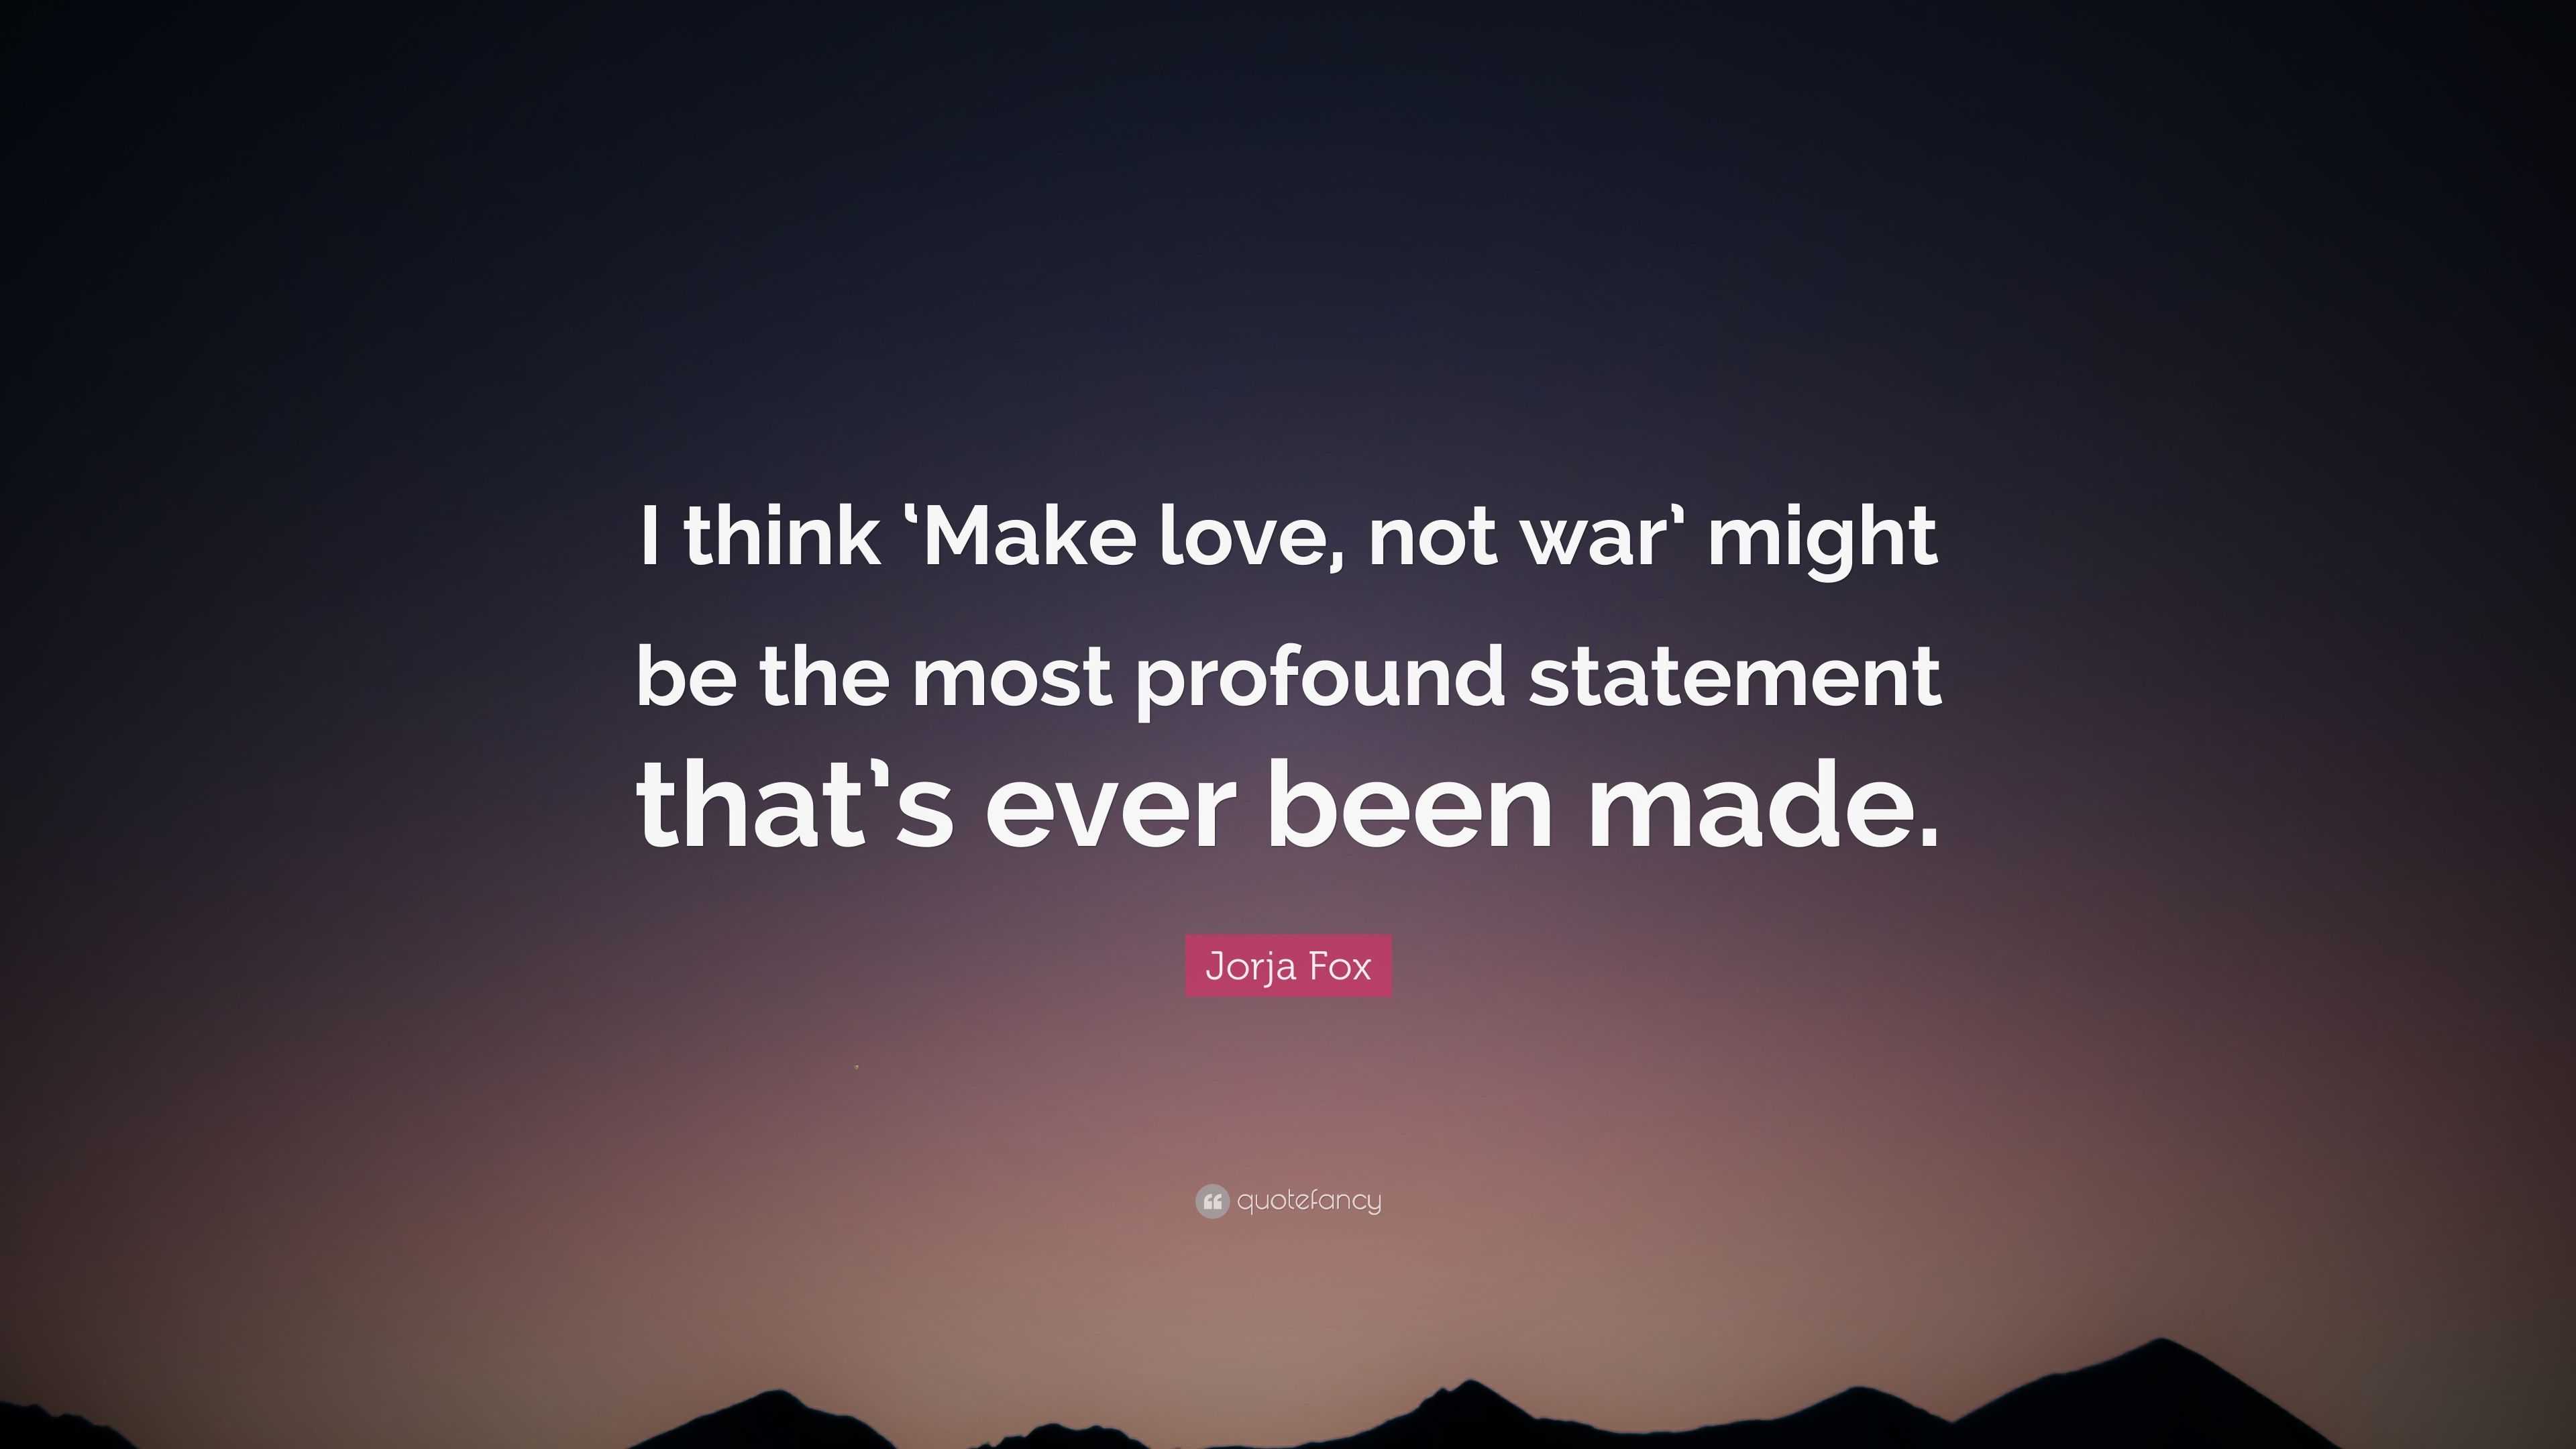 Jorja Fox Quote “I think Make love not war might be